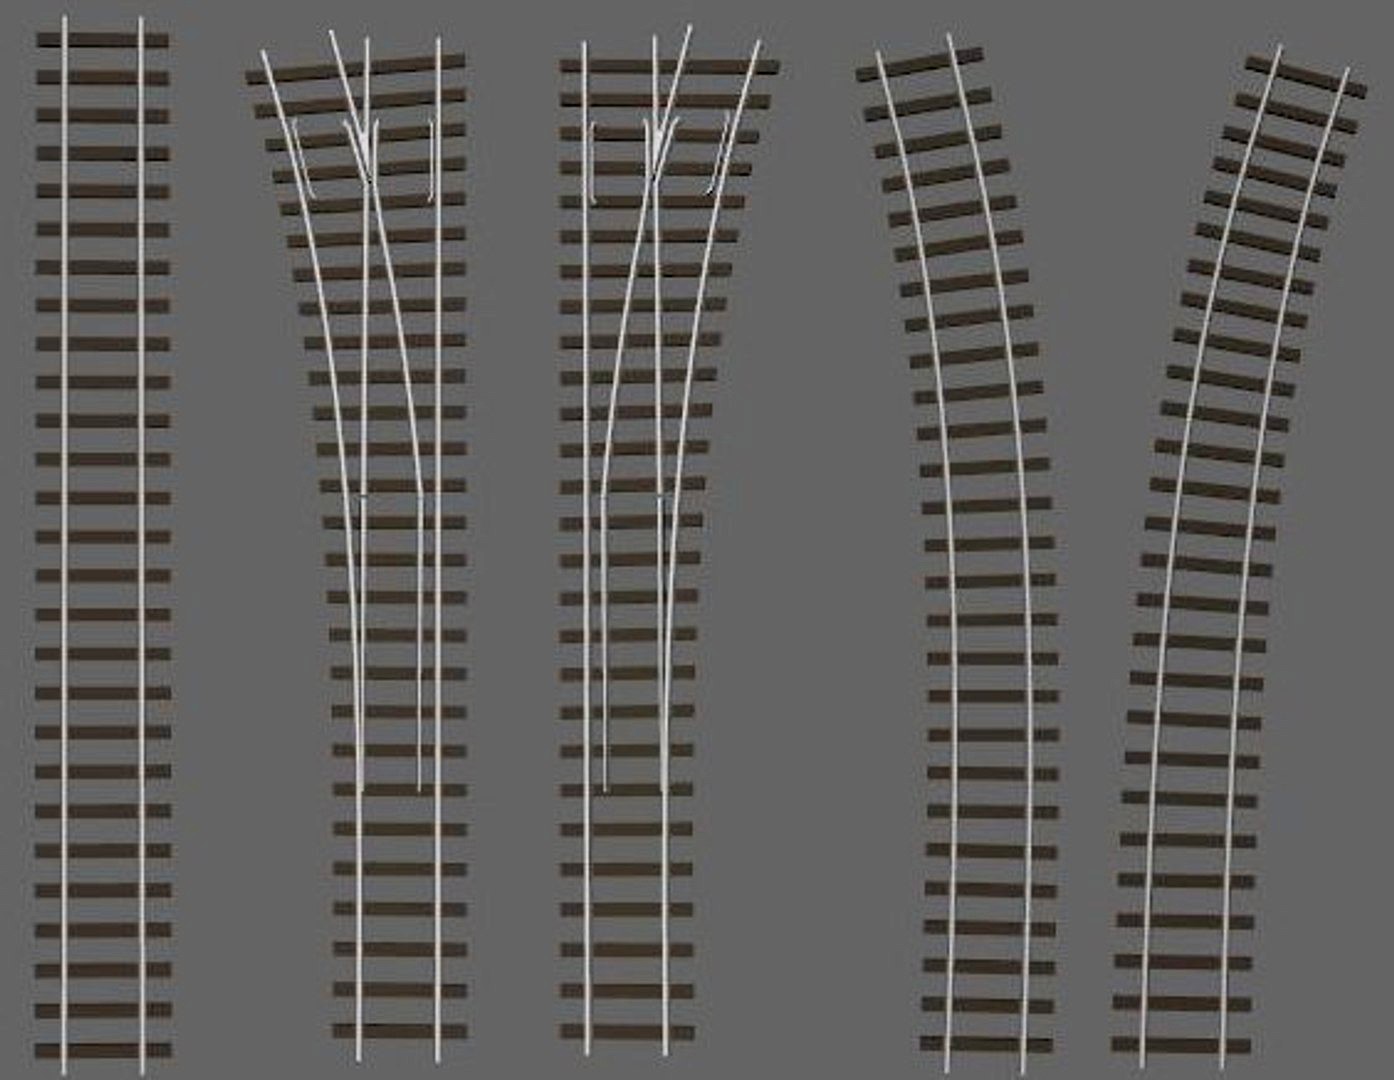 Railway track sections